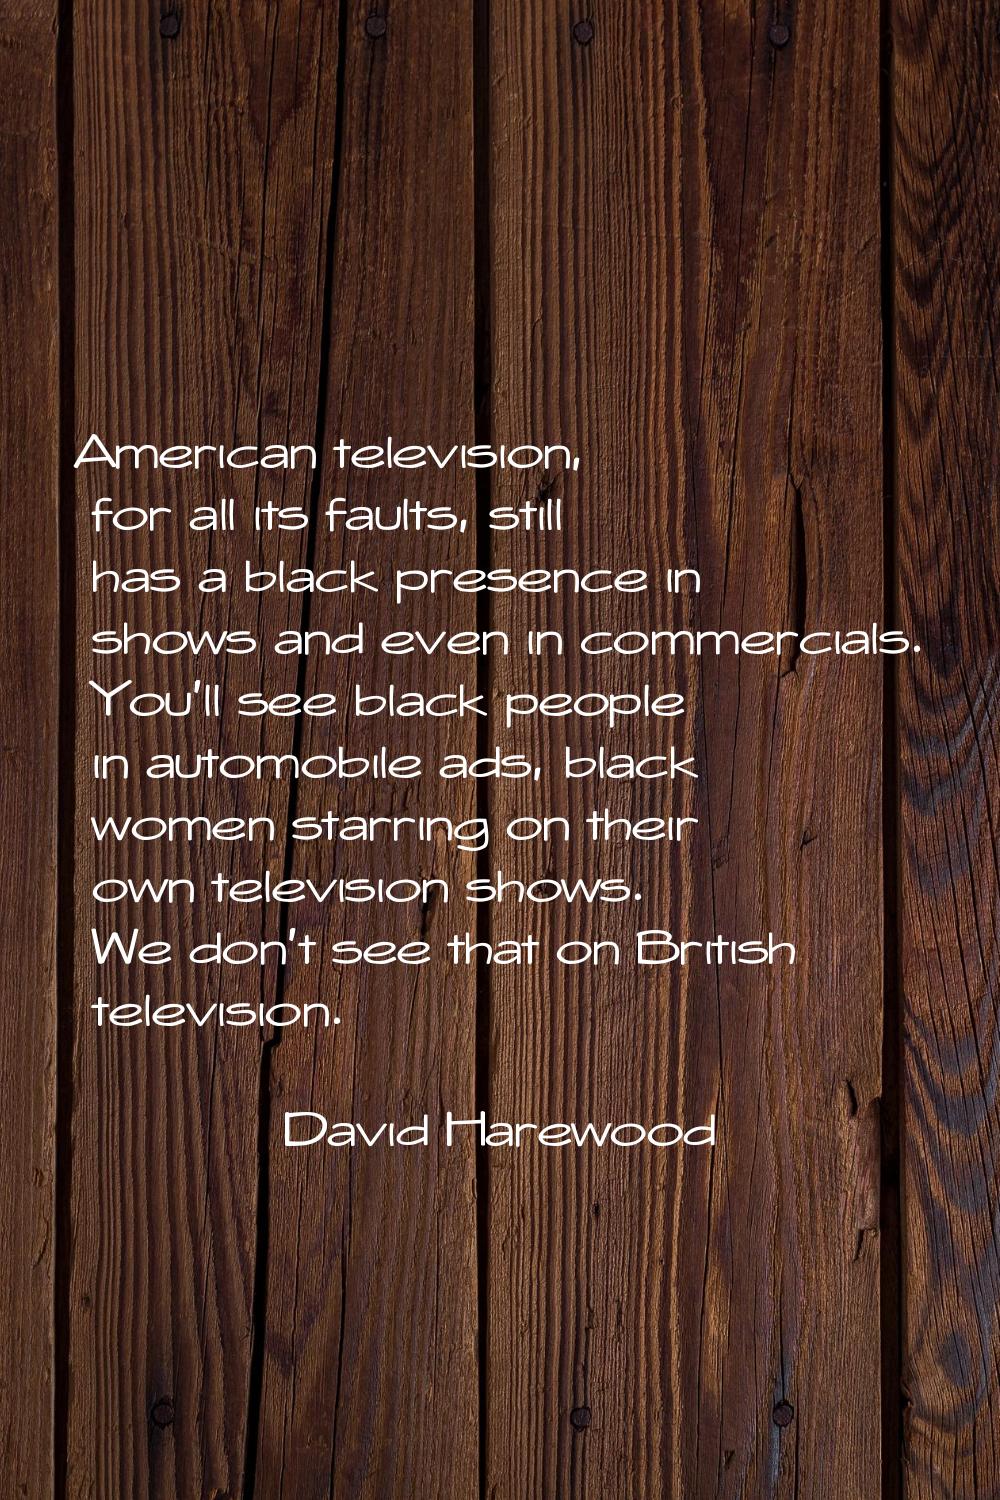 American television, for all its faults, still has a black presence in shows and even in commercial